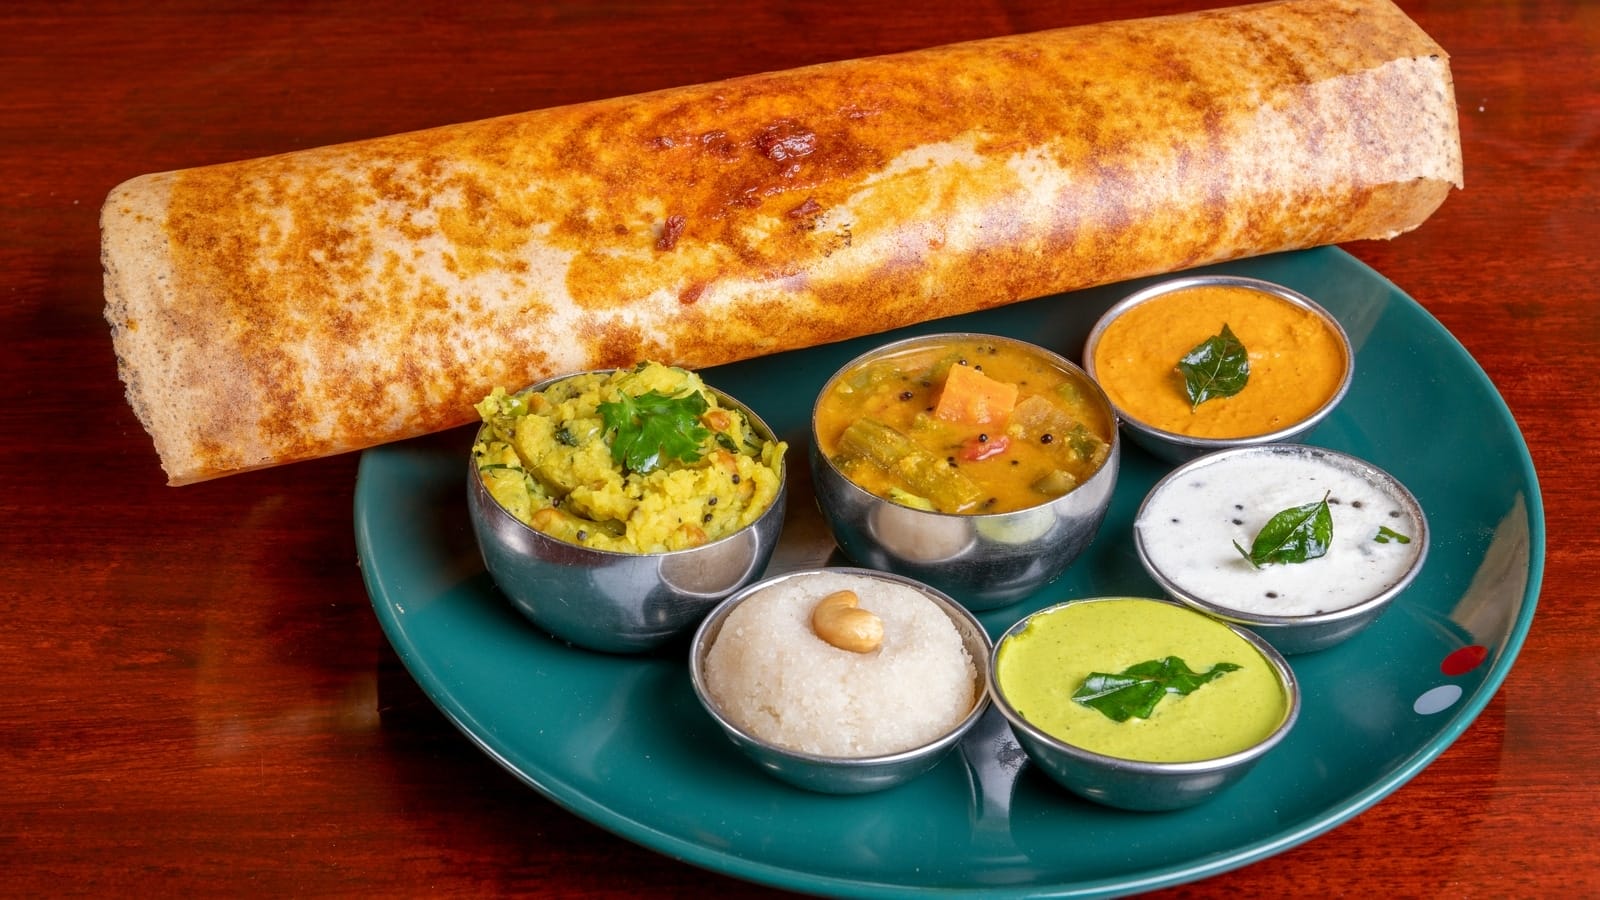 World Dosa Day: Swiggy delivered 29 million dosas in the past year, averaging 122 pieces per minute